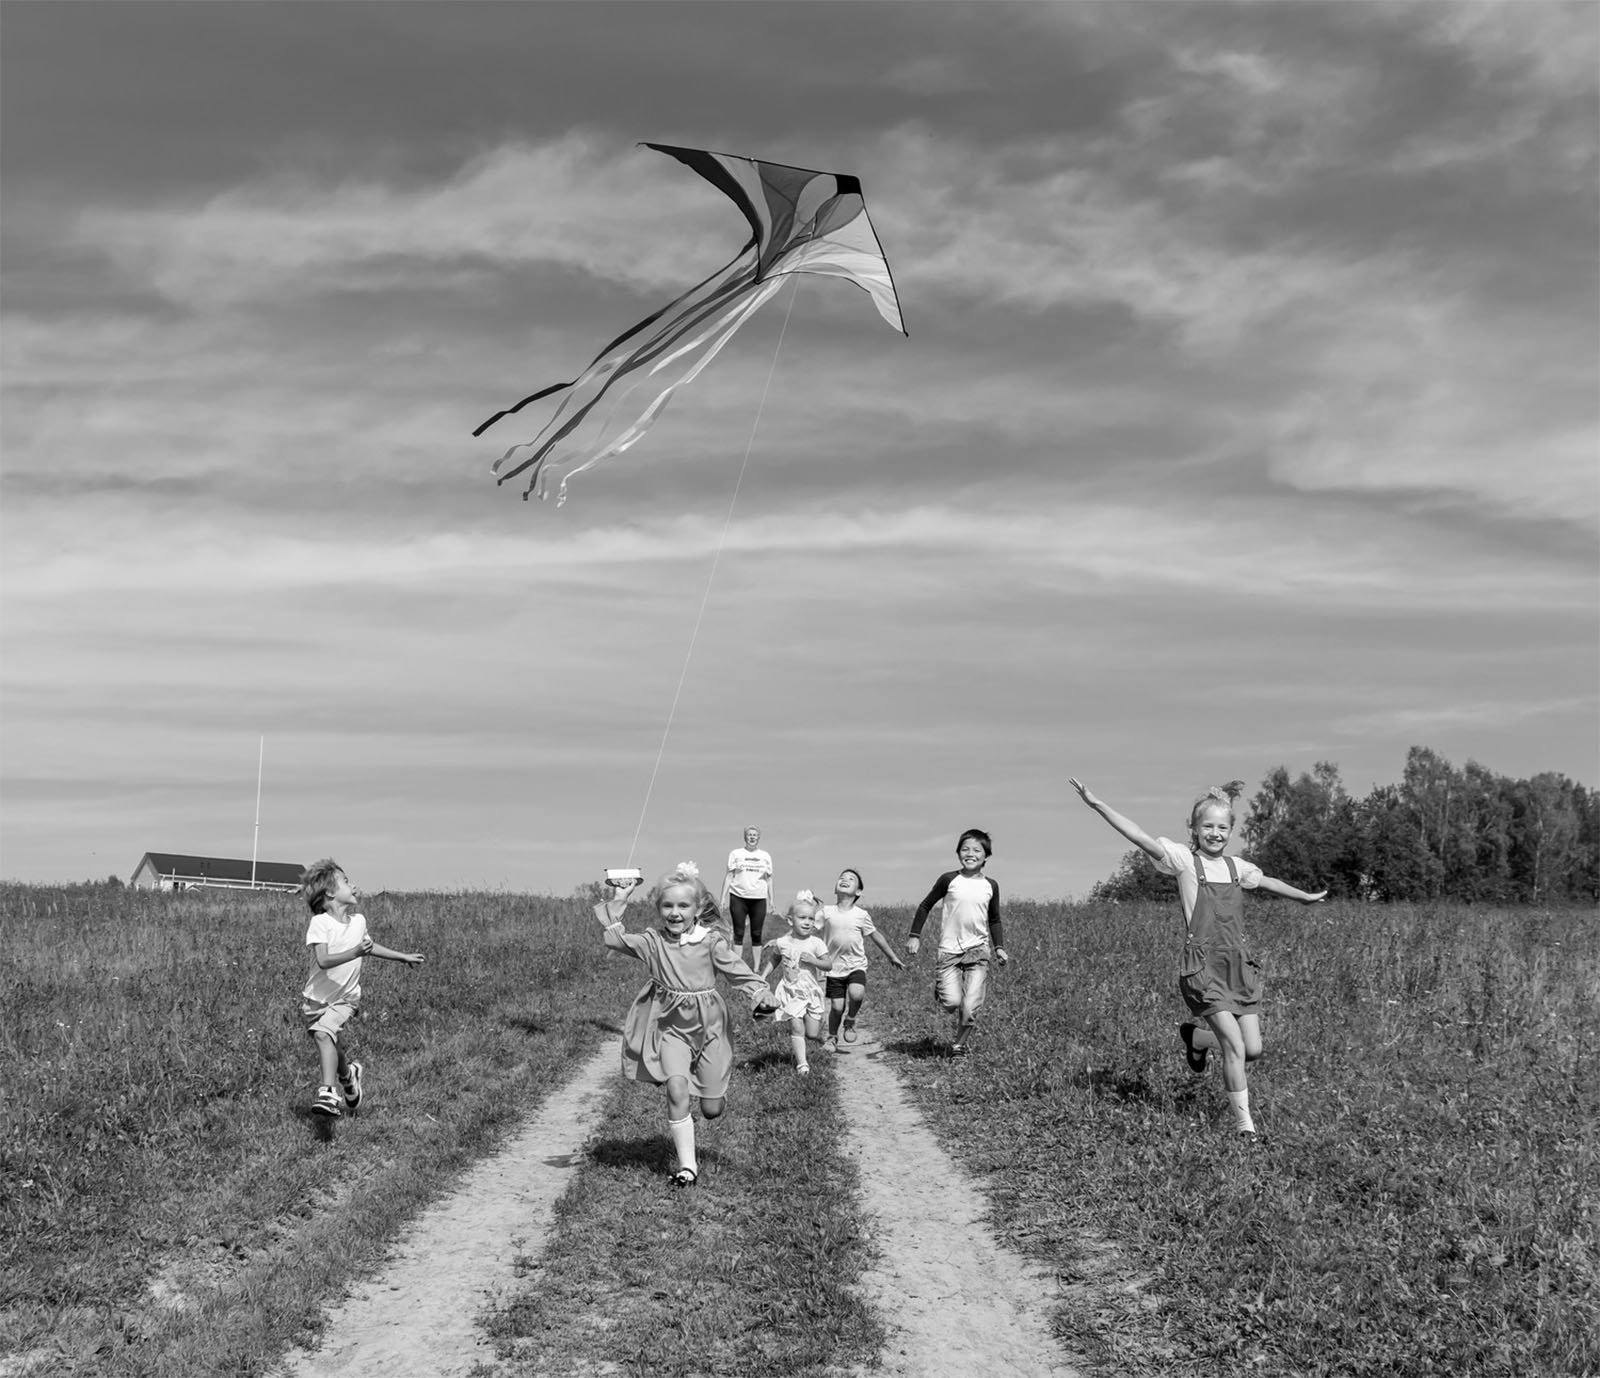 A group of children run excitedly down a dirt path in a grassy field, flying a large kite. The sky above them is partly cloudy, and a small building is visible in the background. The scene is lively and joyful, capturing the fun of outdoor play.